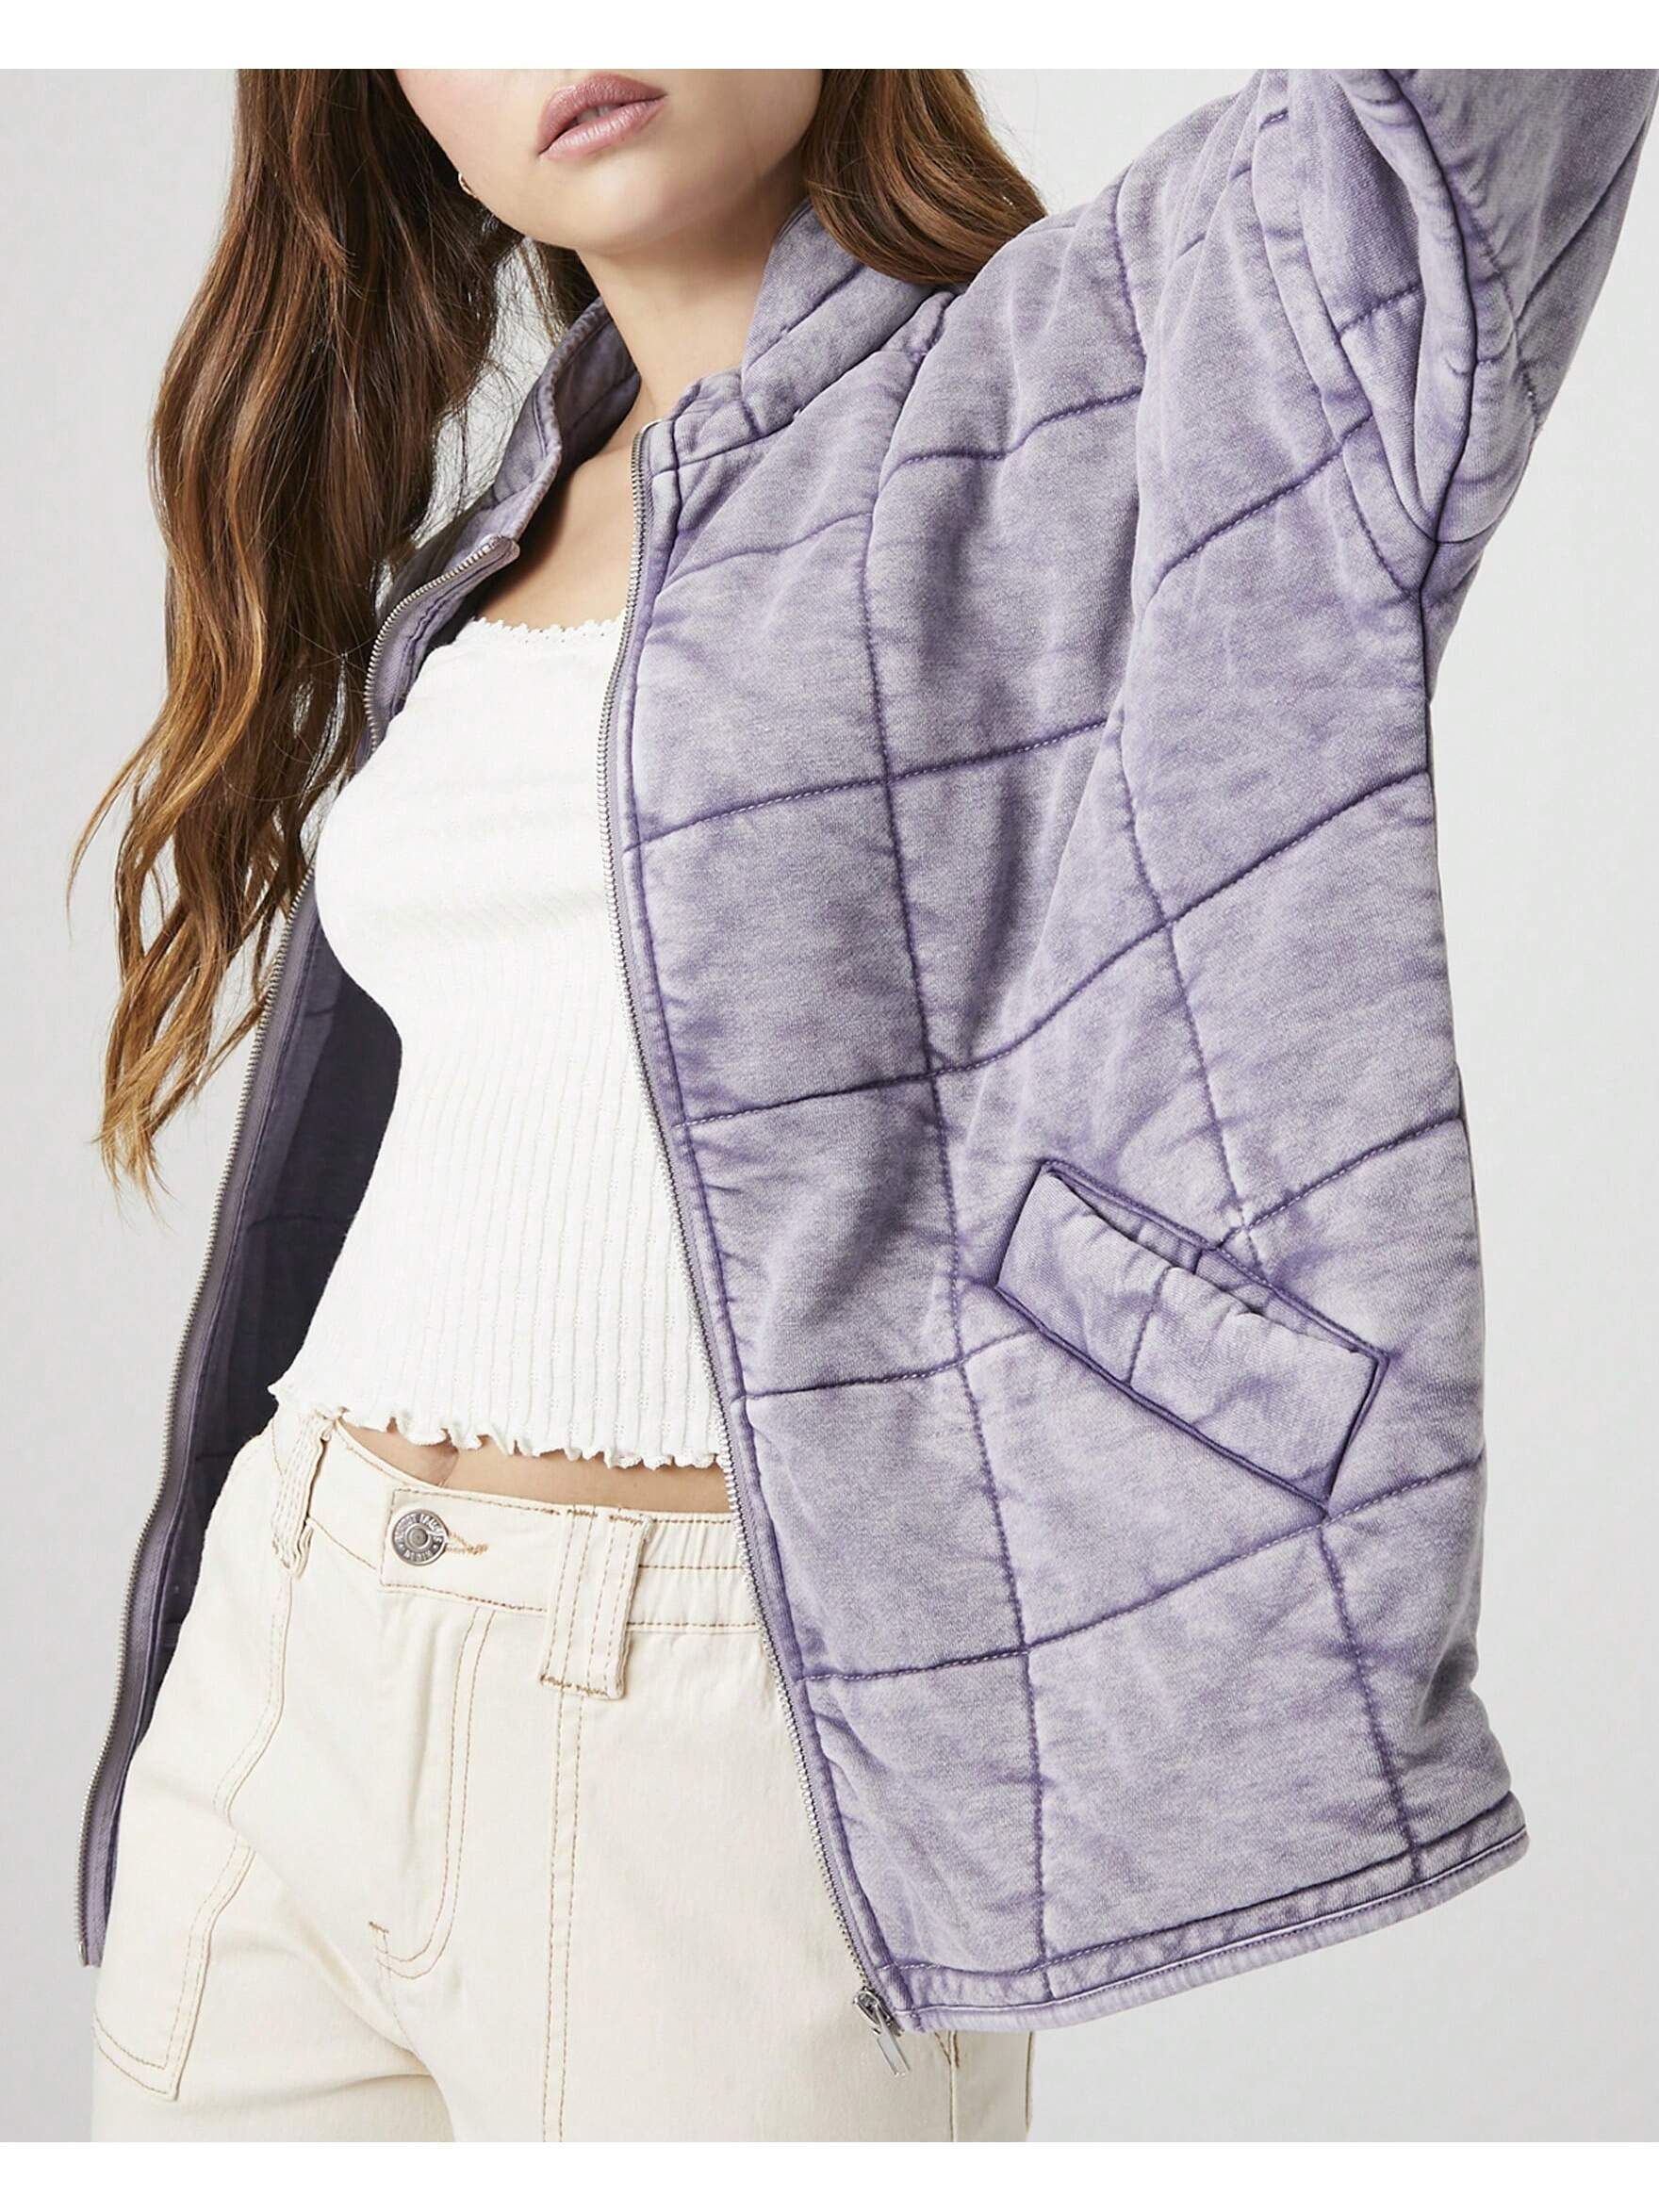 Forever 21 Quilted Zip-Up Jacket | SHEIN